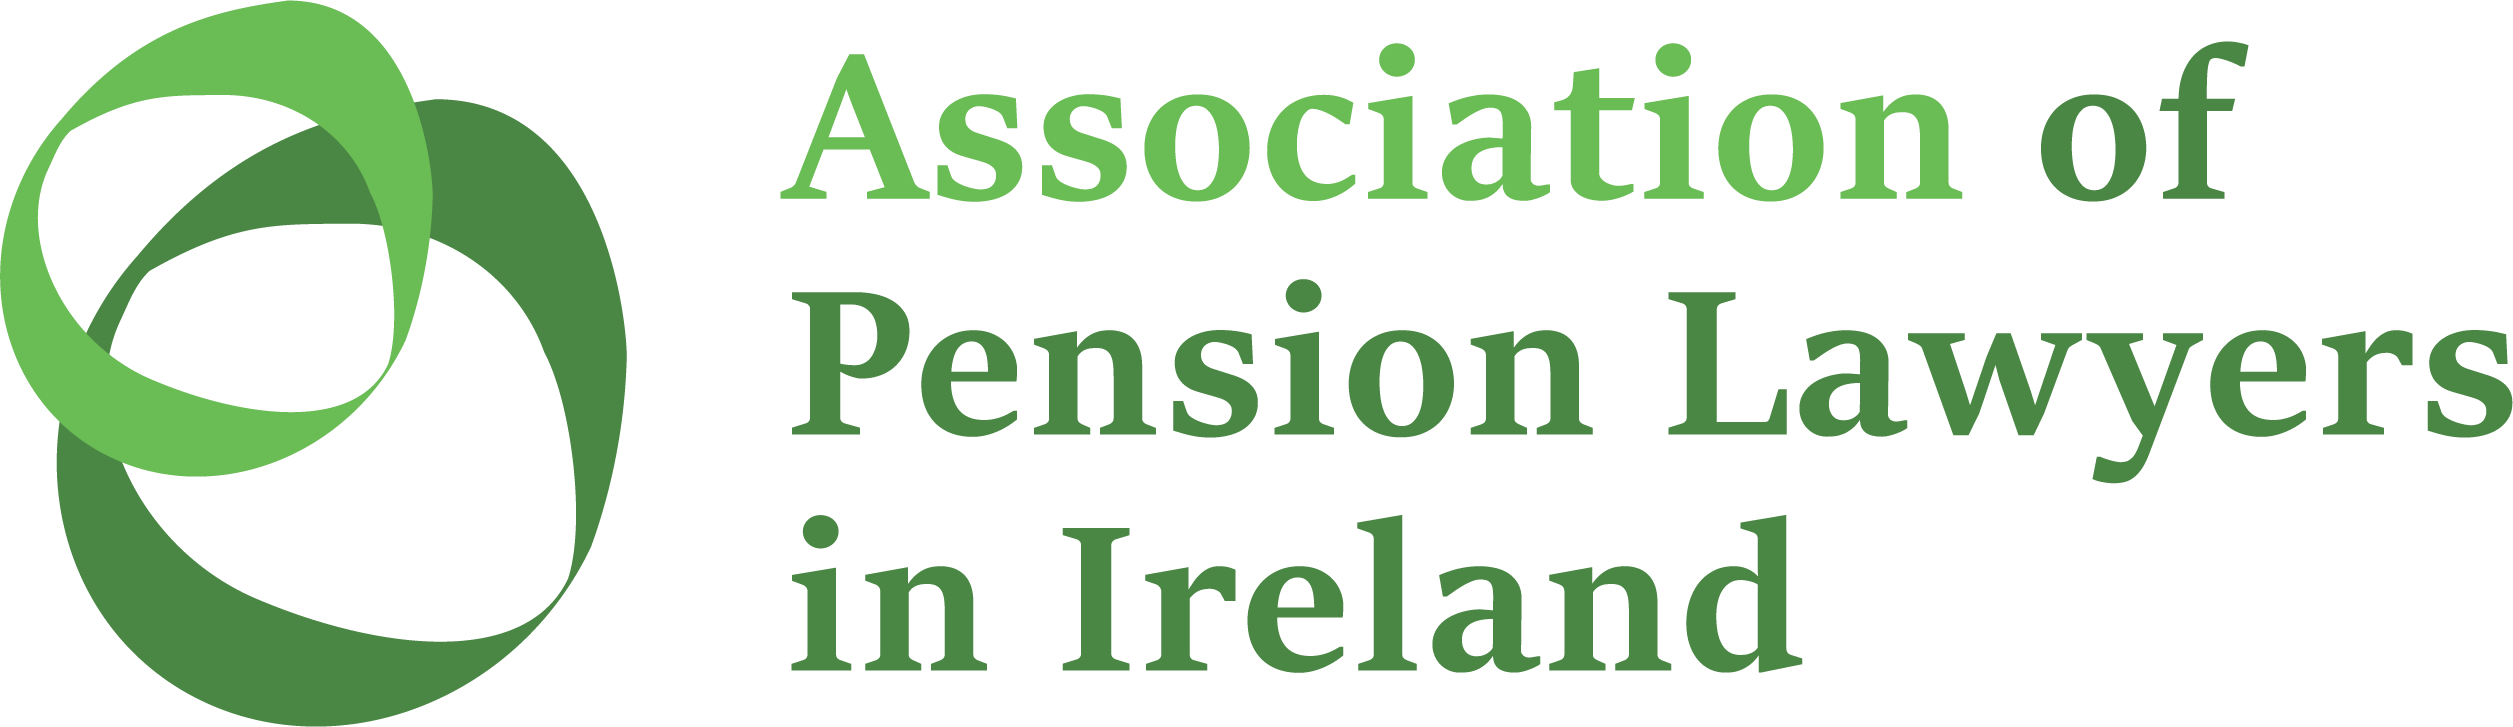 APLI - The Association of Pension Lawyers in Ireland